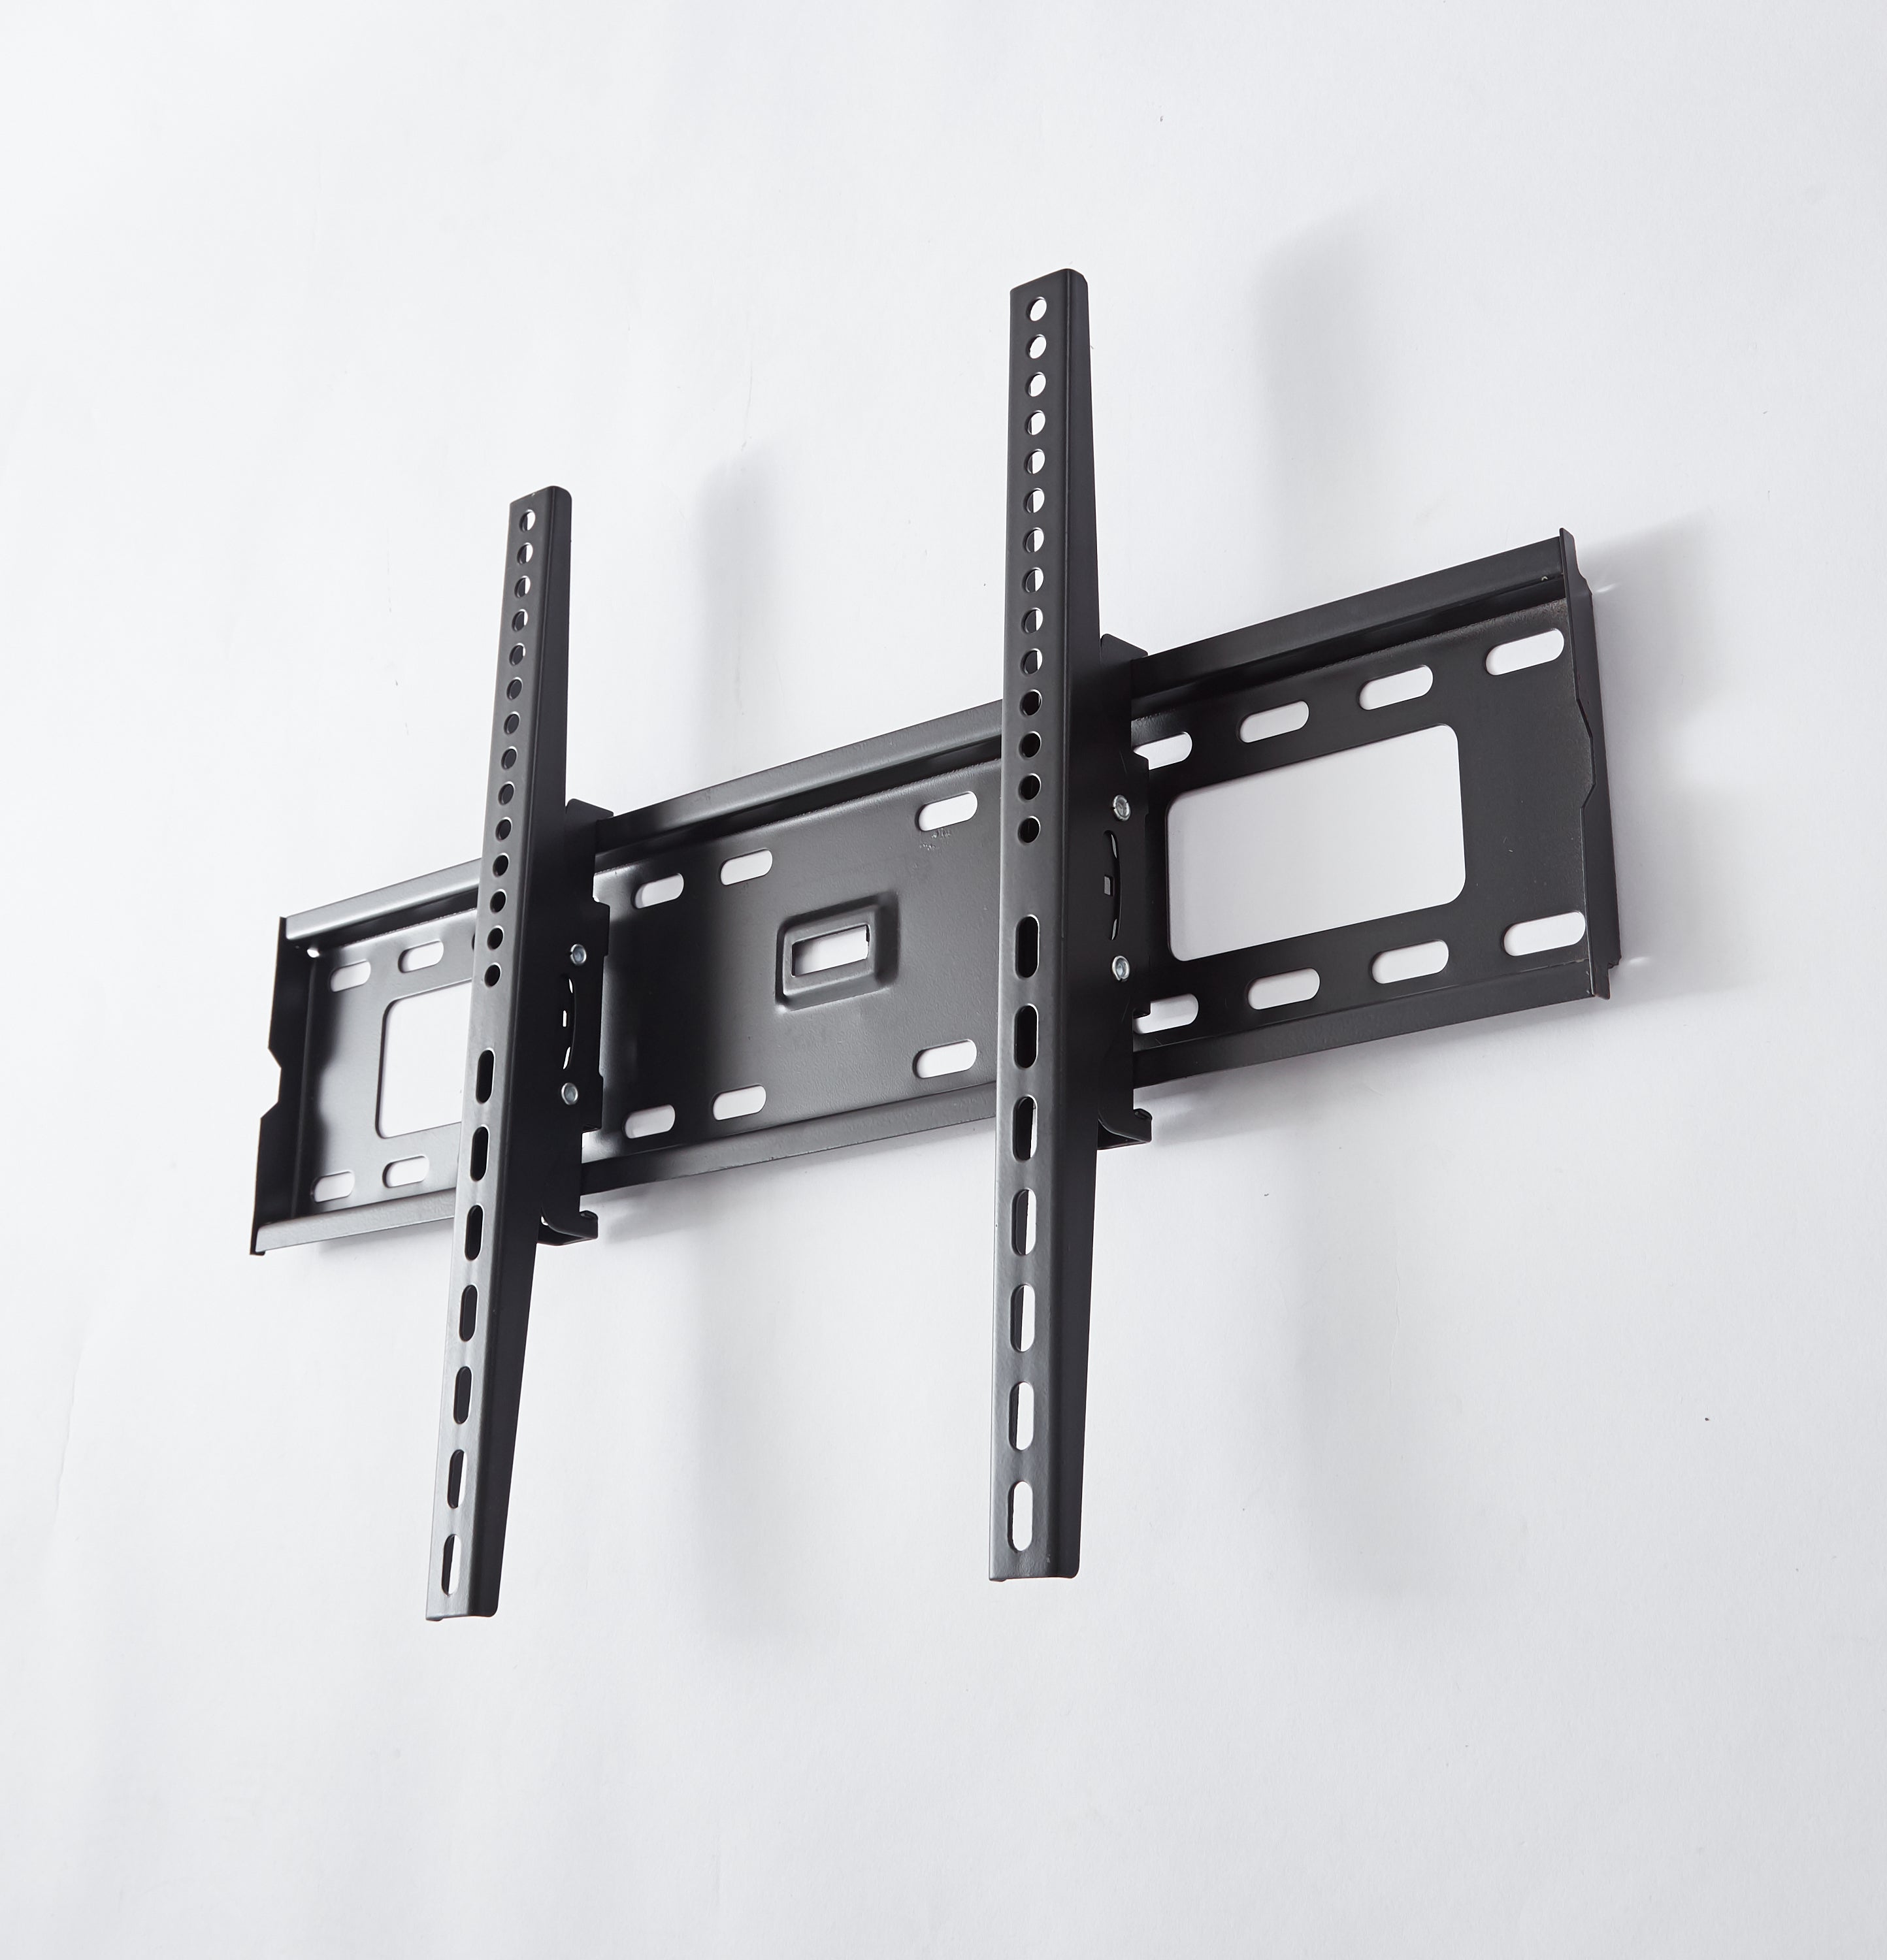 Full Motion TV Wall Bracket Mount for 32 to 70 inch screens1